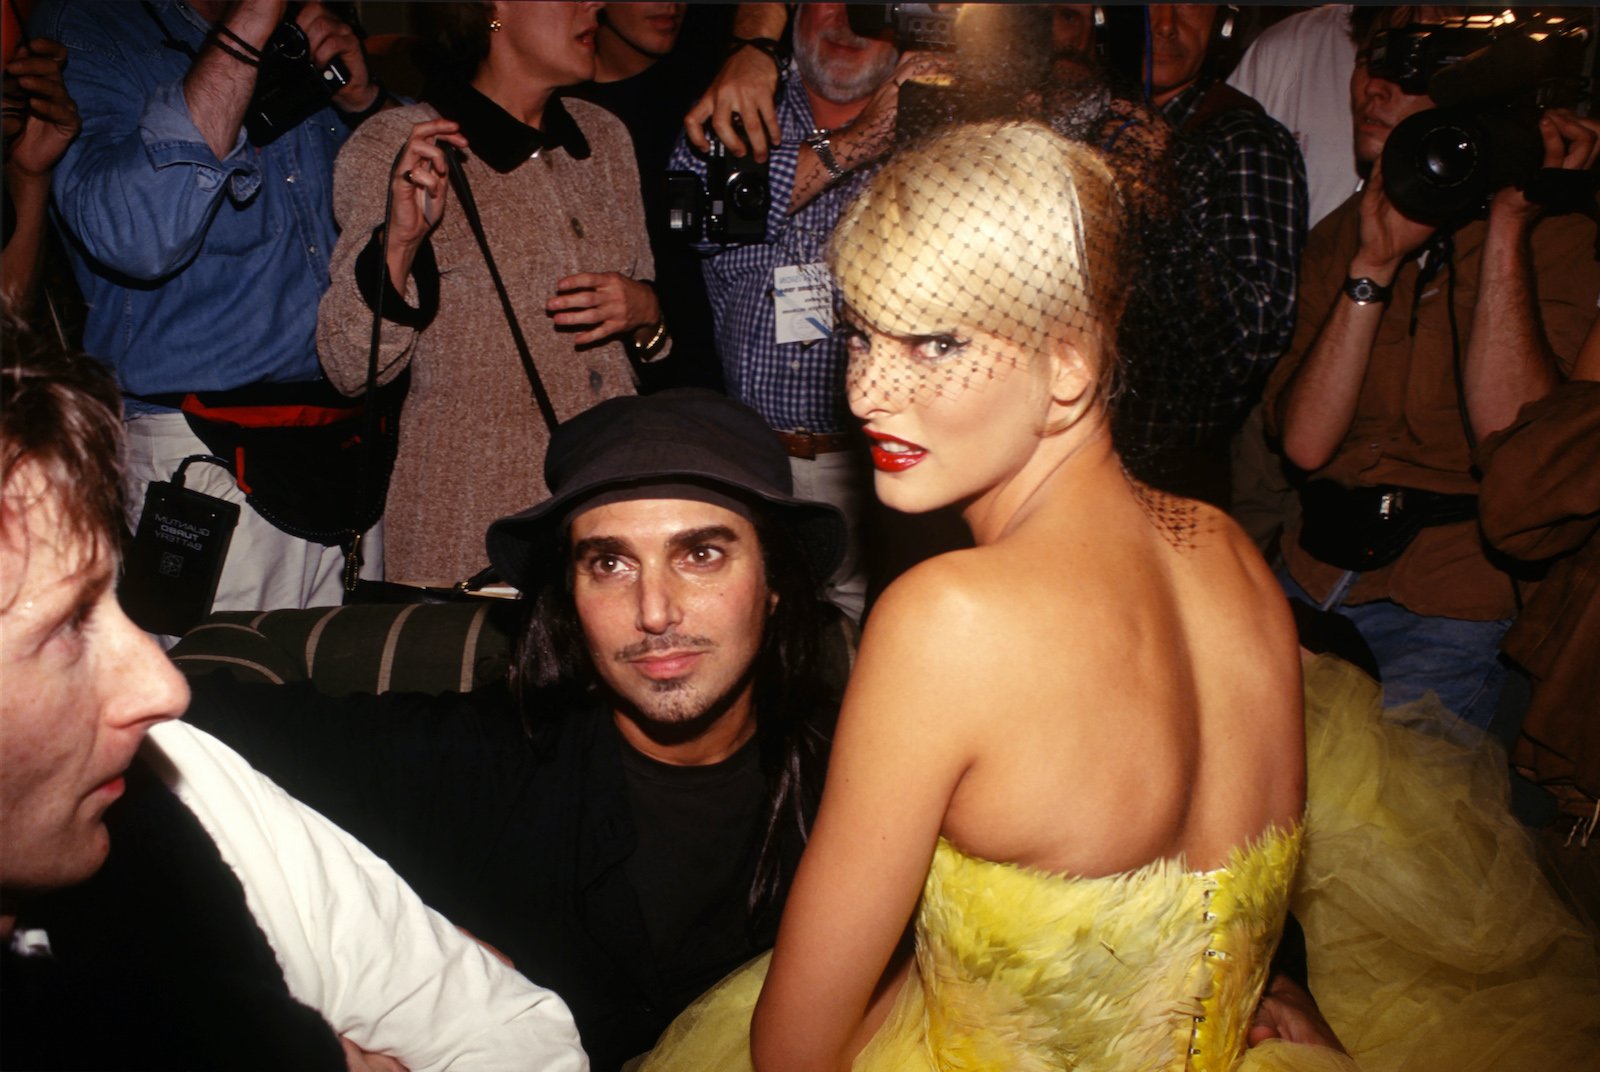 Steven Meisel and Linda Evangelista attended a Fashion Party during Paris Fashion Week in the 1990s 